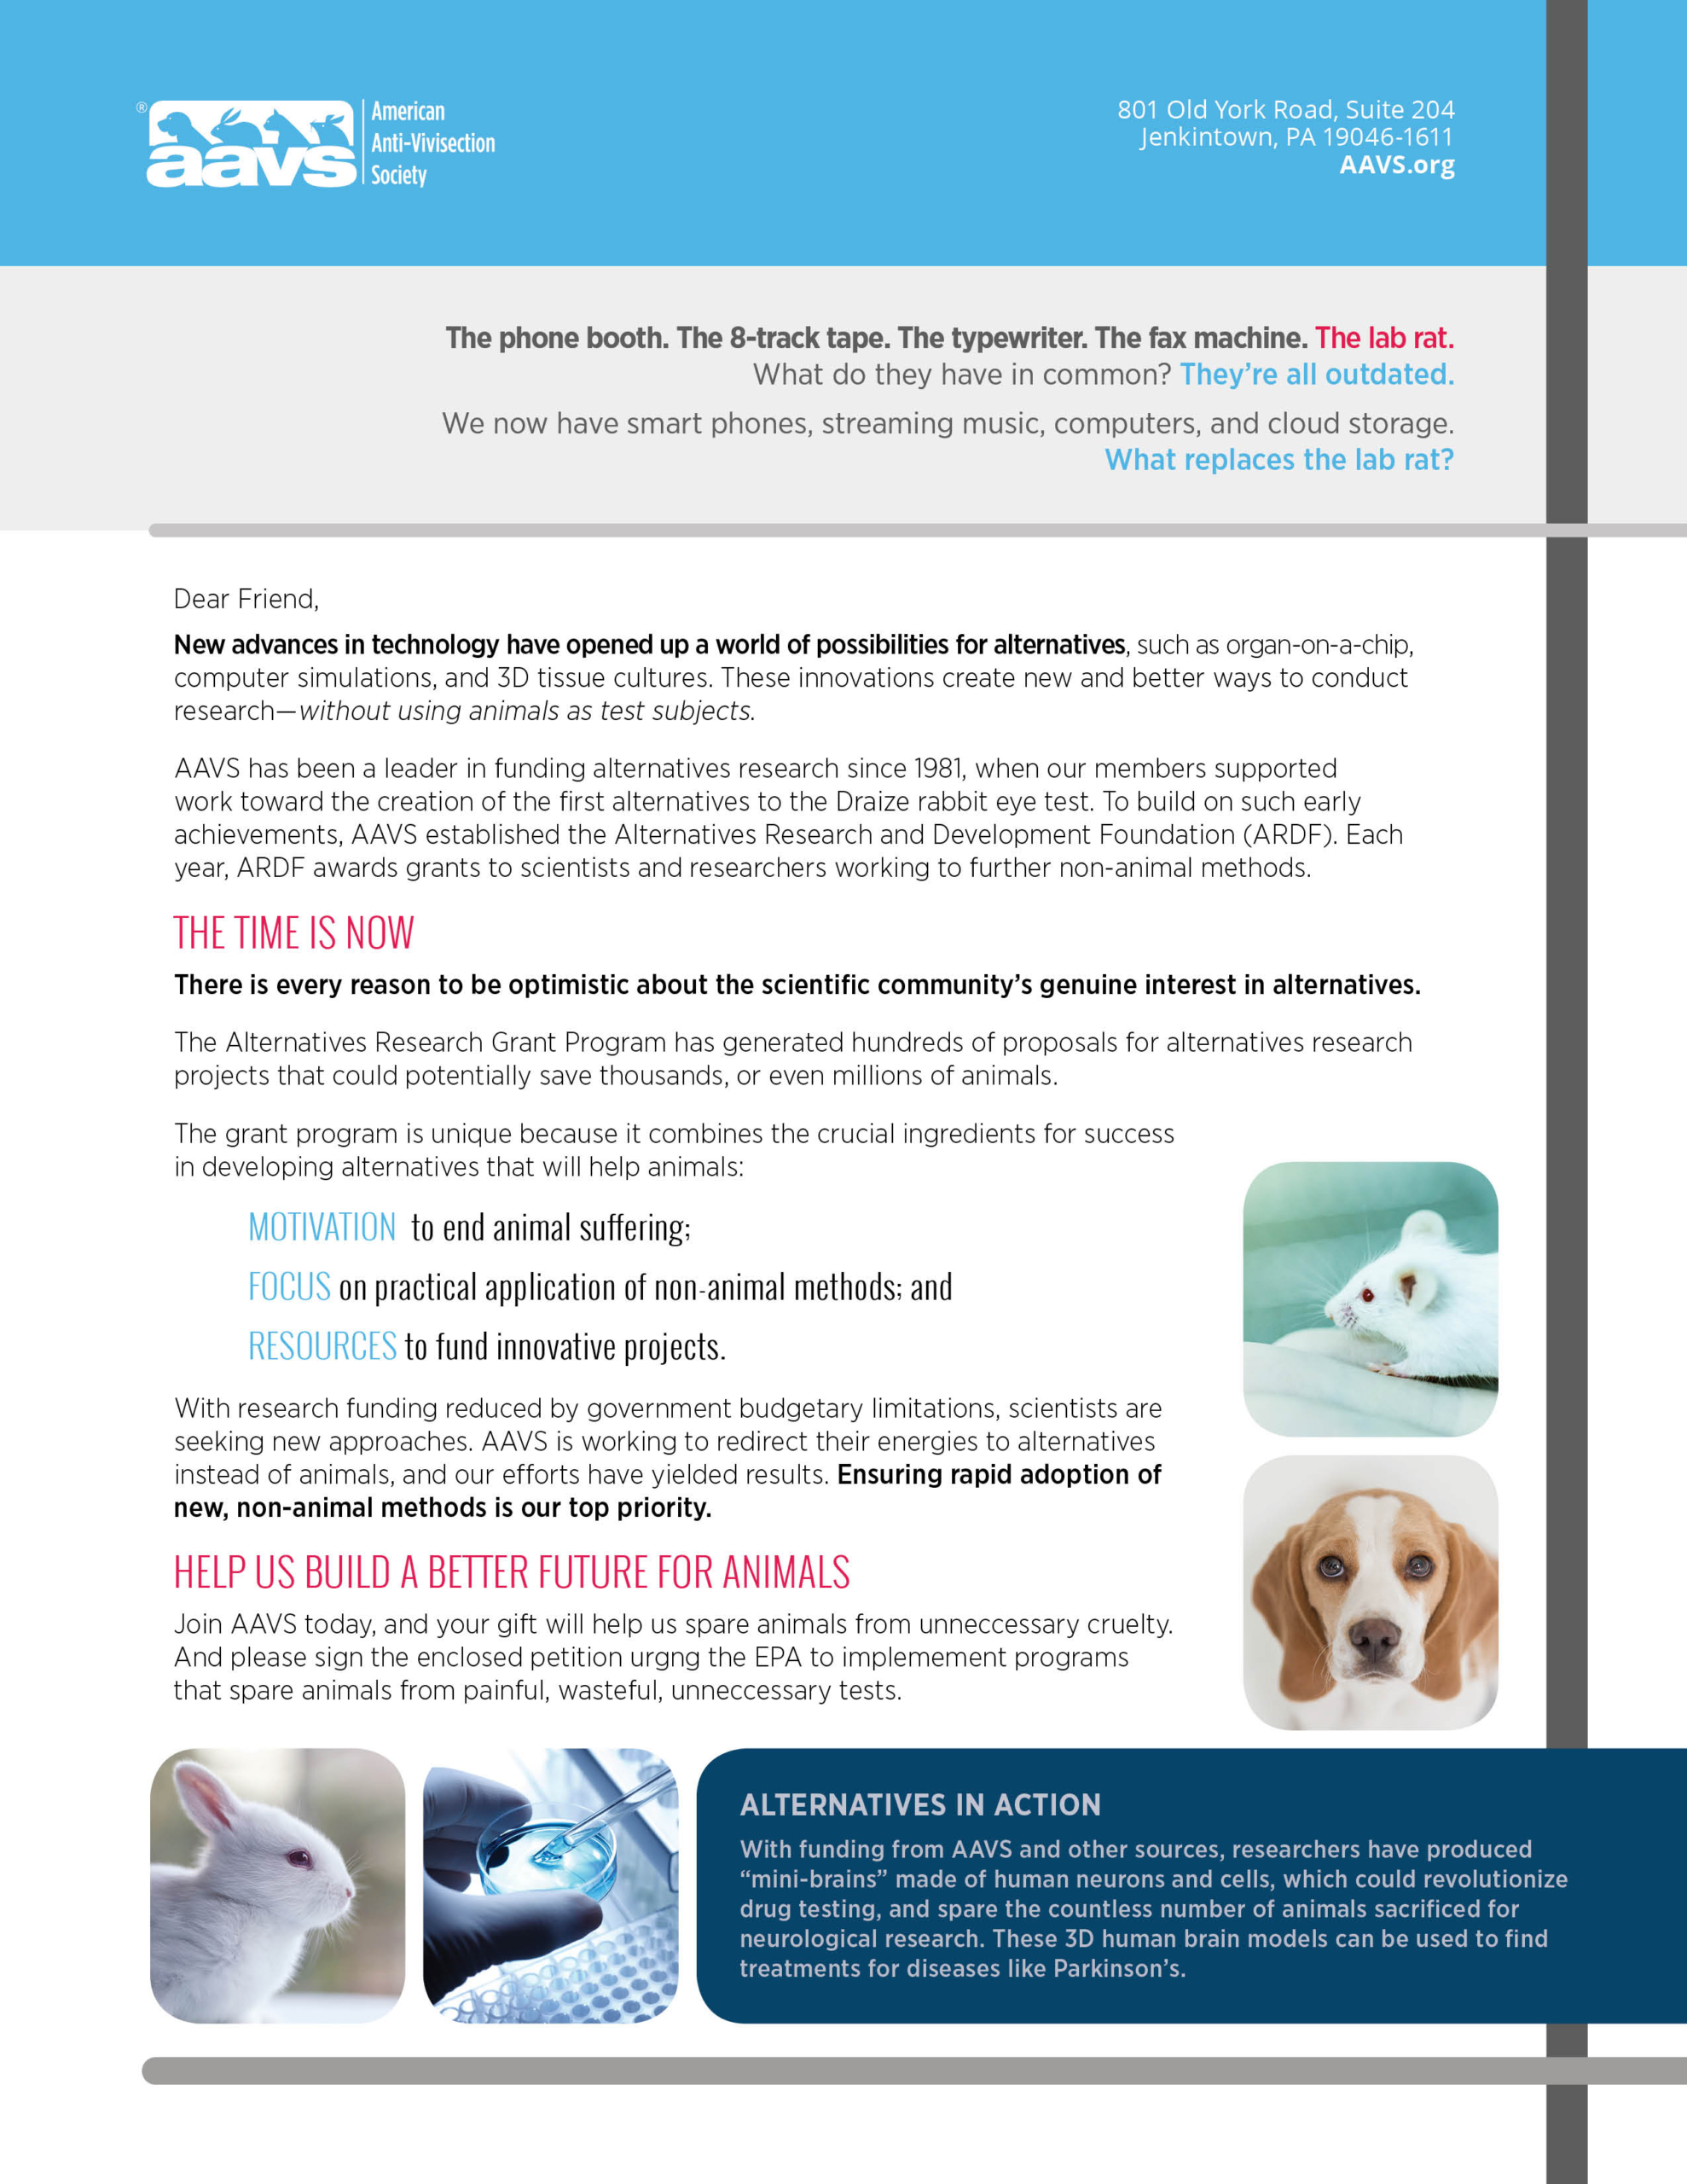 AAVS - Acquisition Mailing Package (Alternatives) - Letter Front